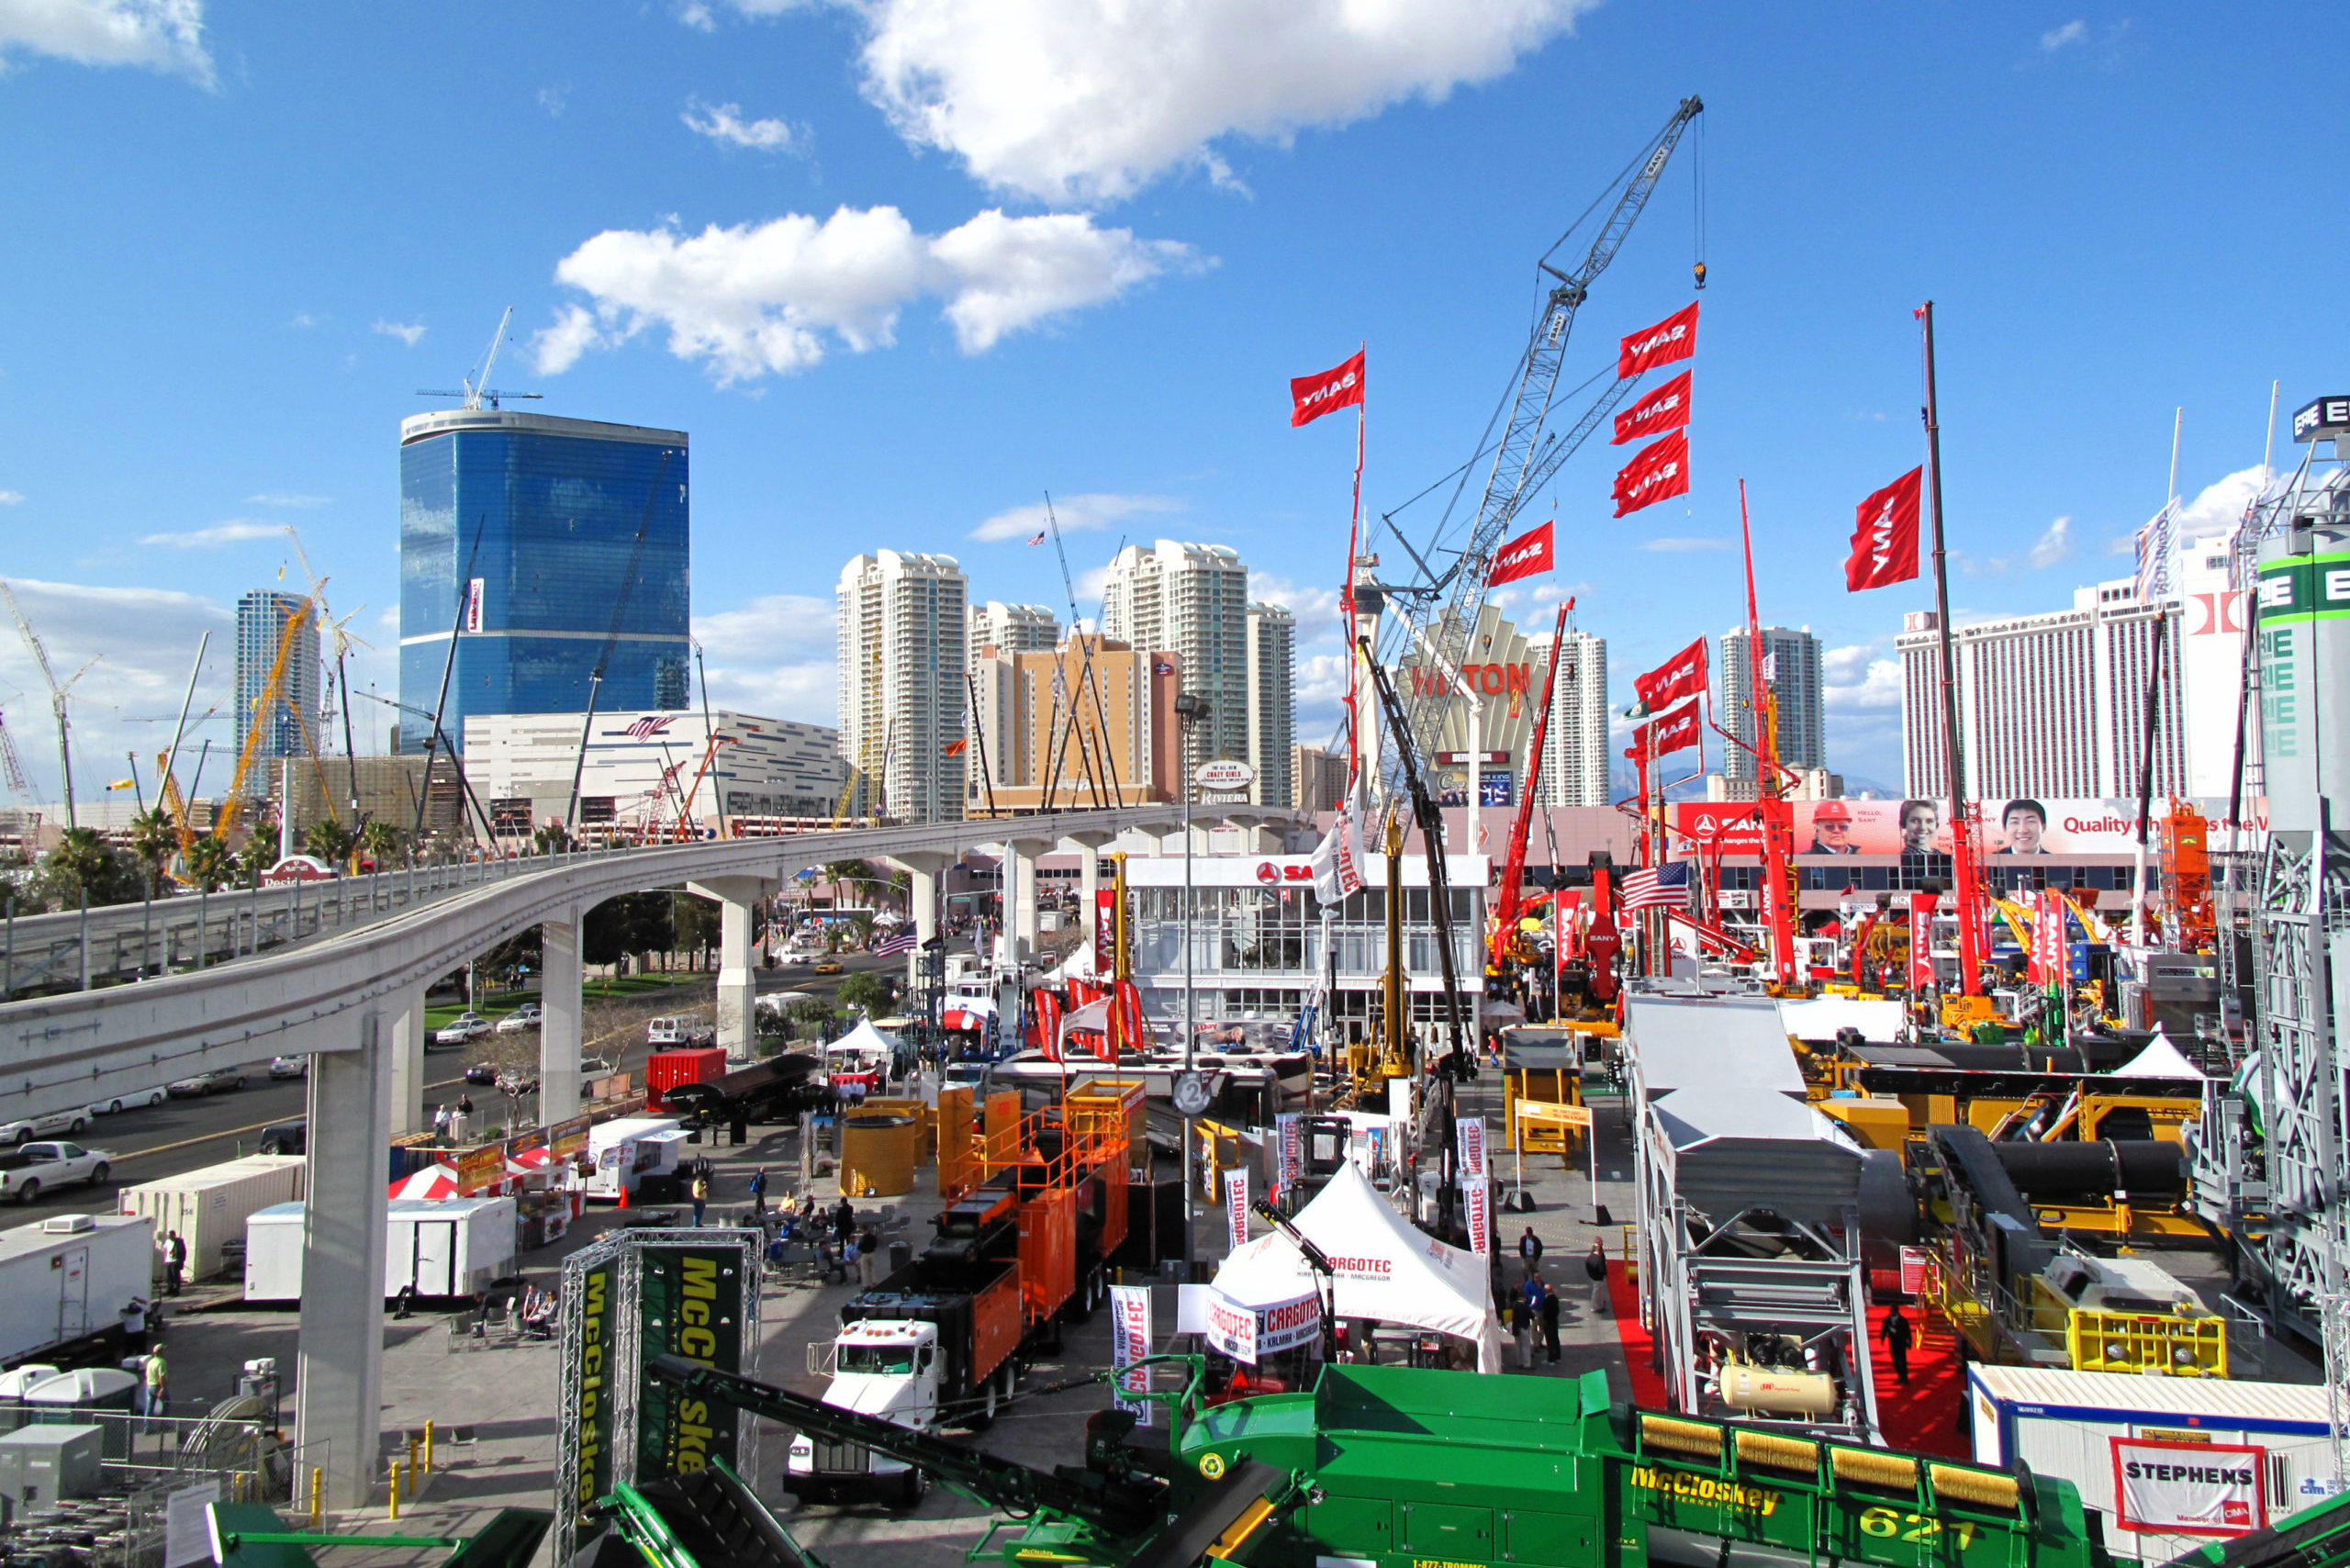 Overview of main exposition area at ConExpo 2011 in Las Vegas, Nevada